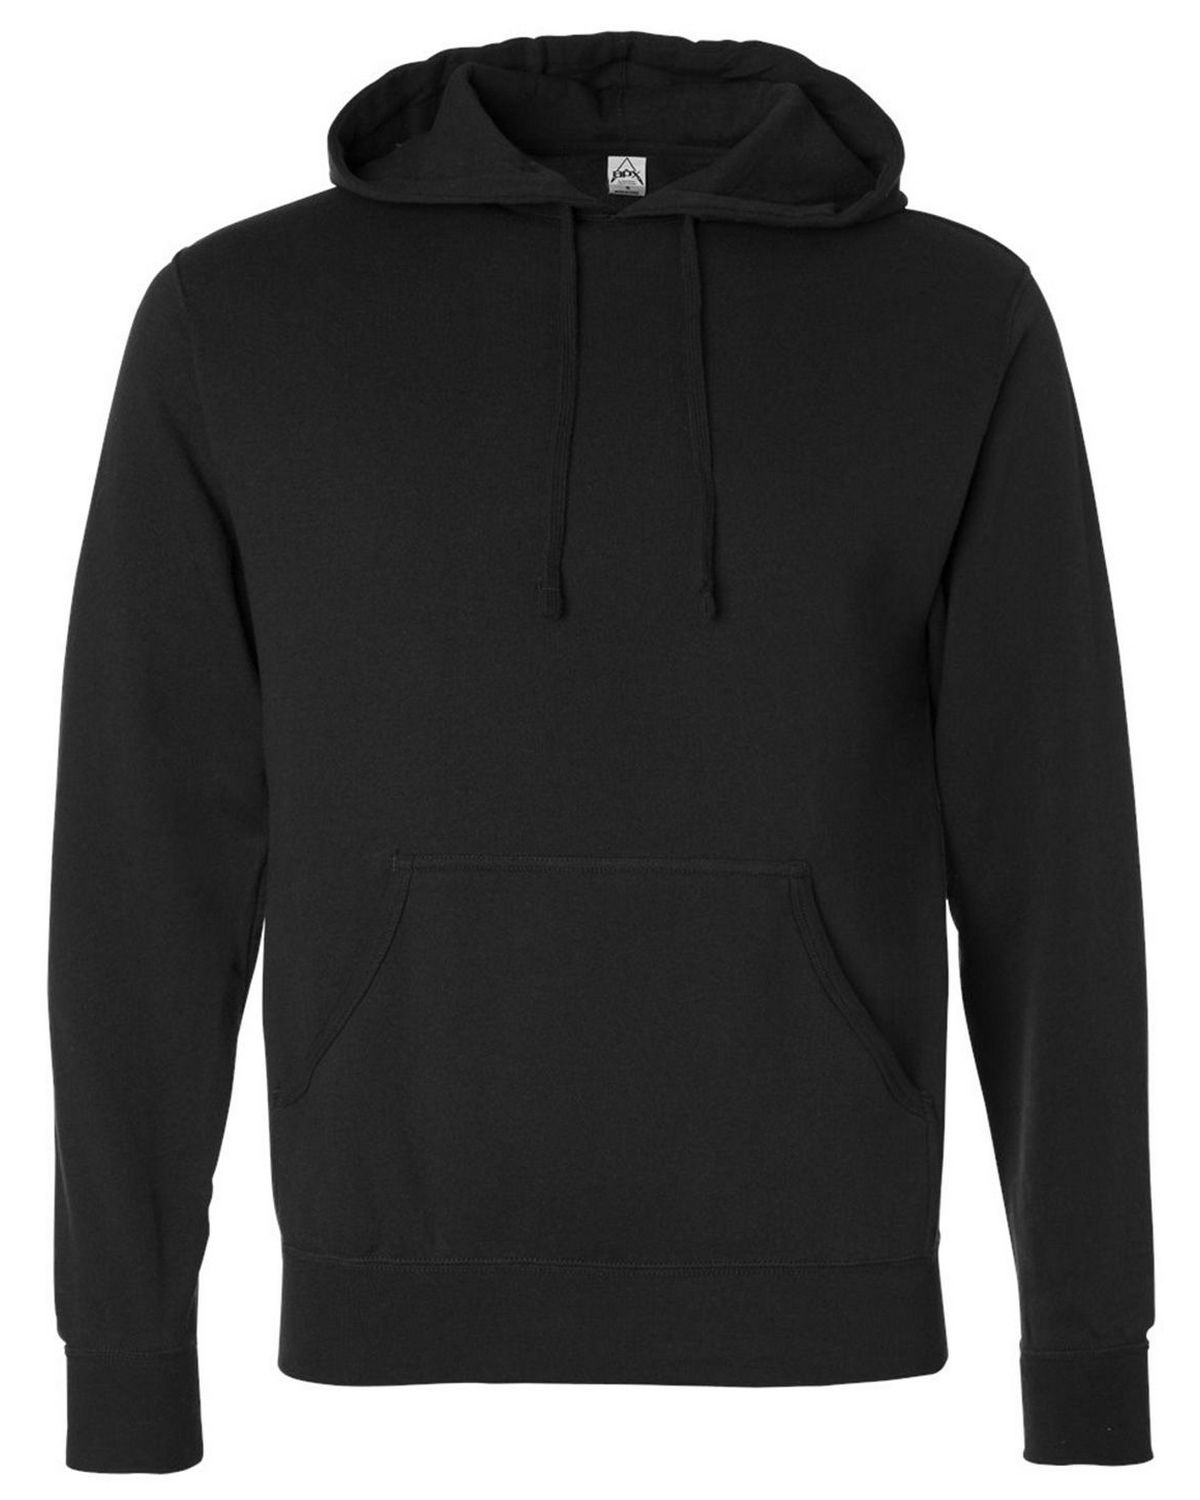 Download Size Chart for Independent Trading Co. AFX4000 Mens Hooded ...